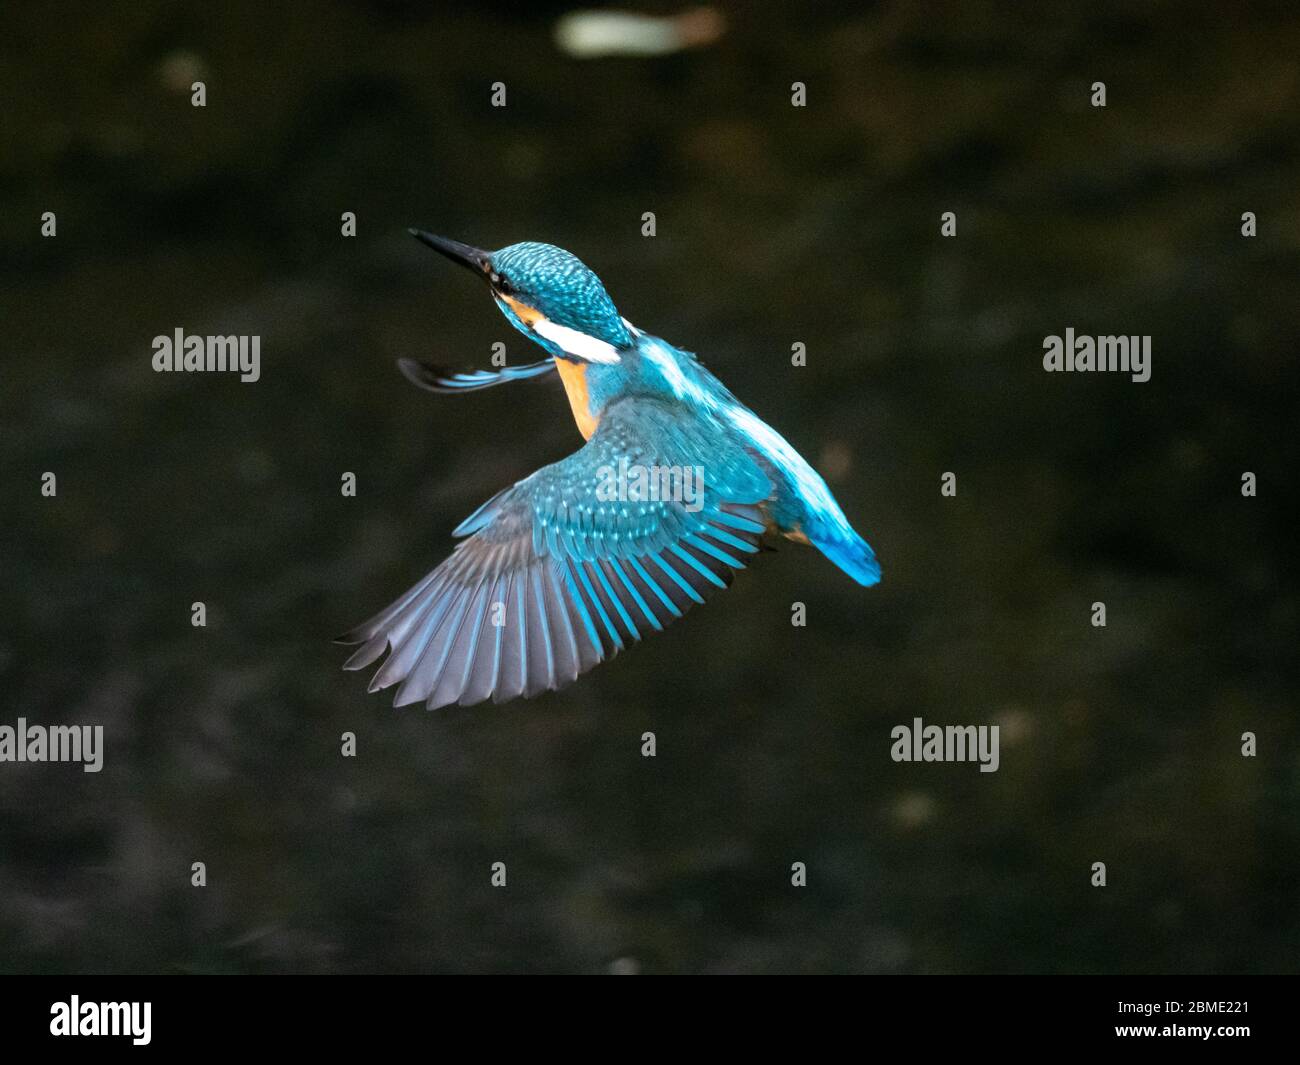 A colorful common kingfisher, Alcedo atthis bengalensis, flies over the Izumi River while fishing in western Yokohama, Japan. Stock Photo